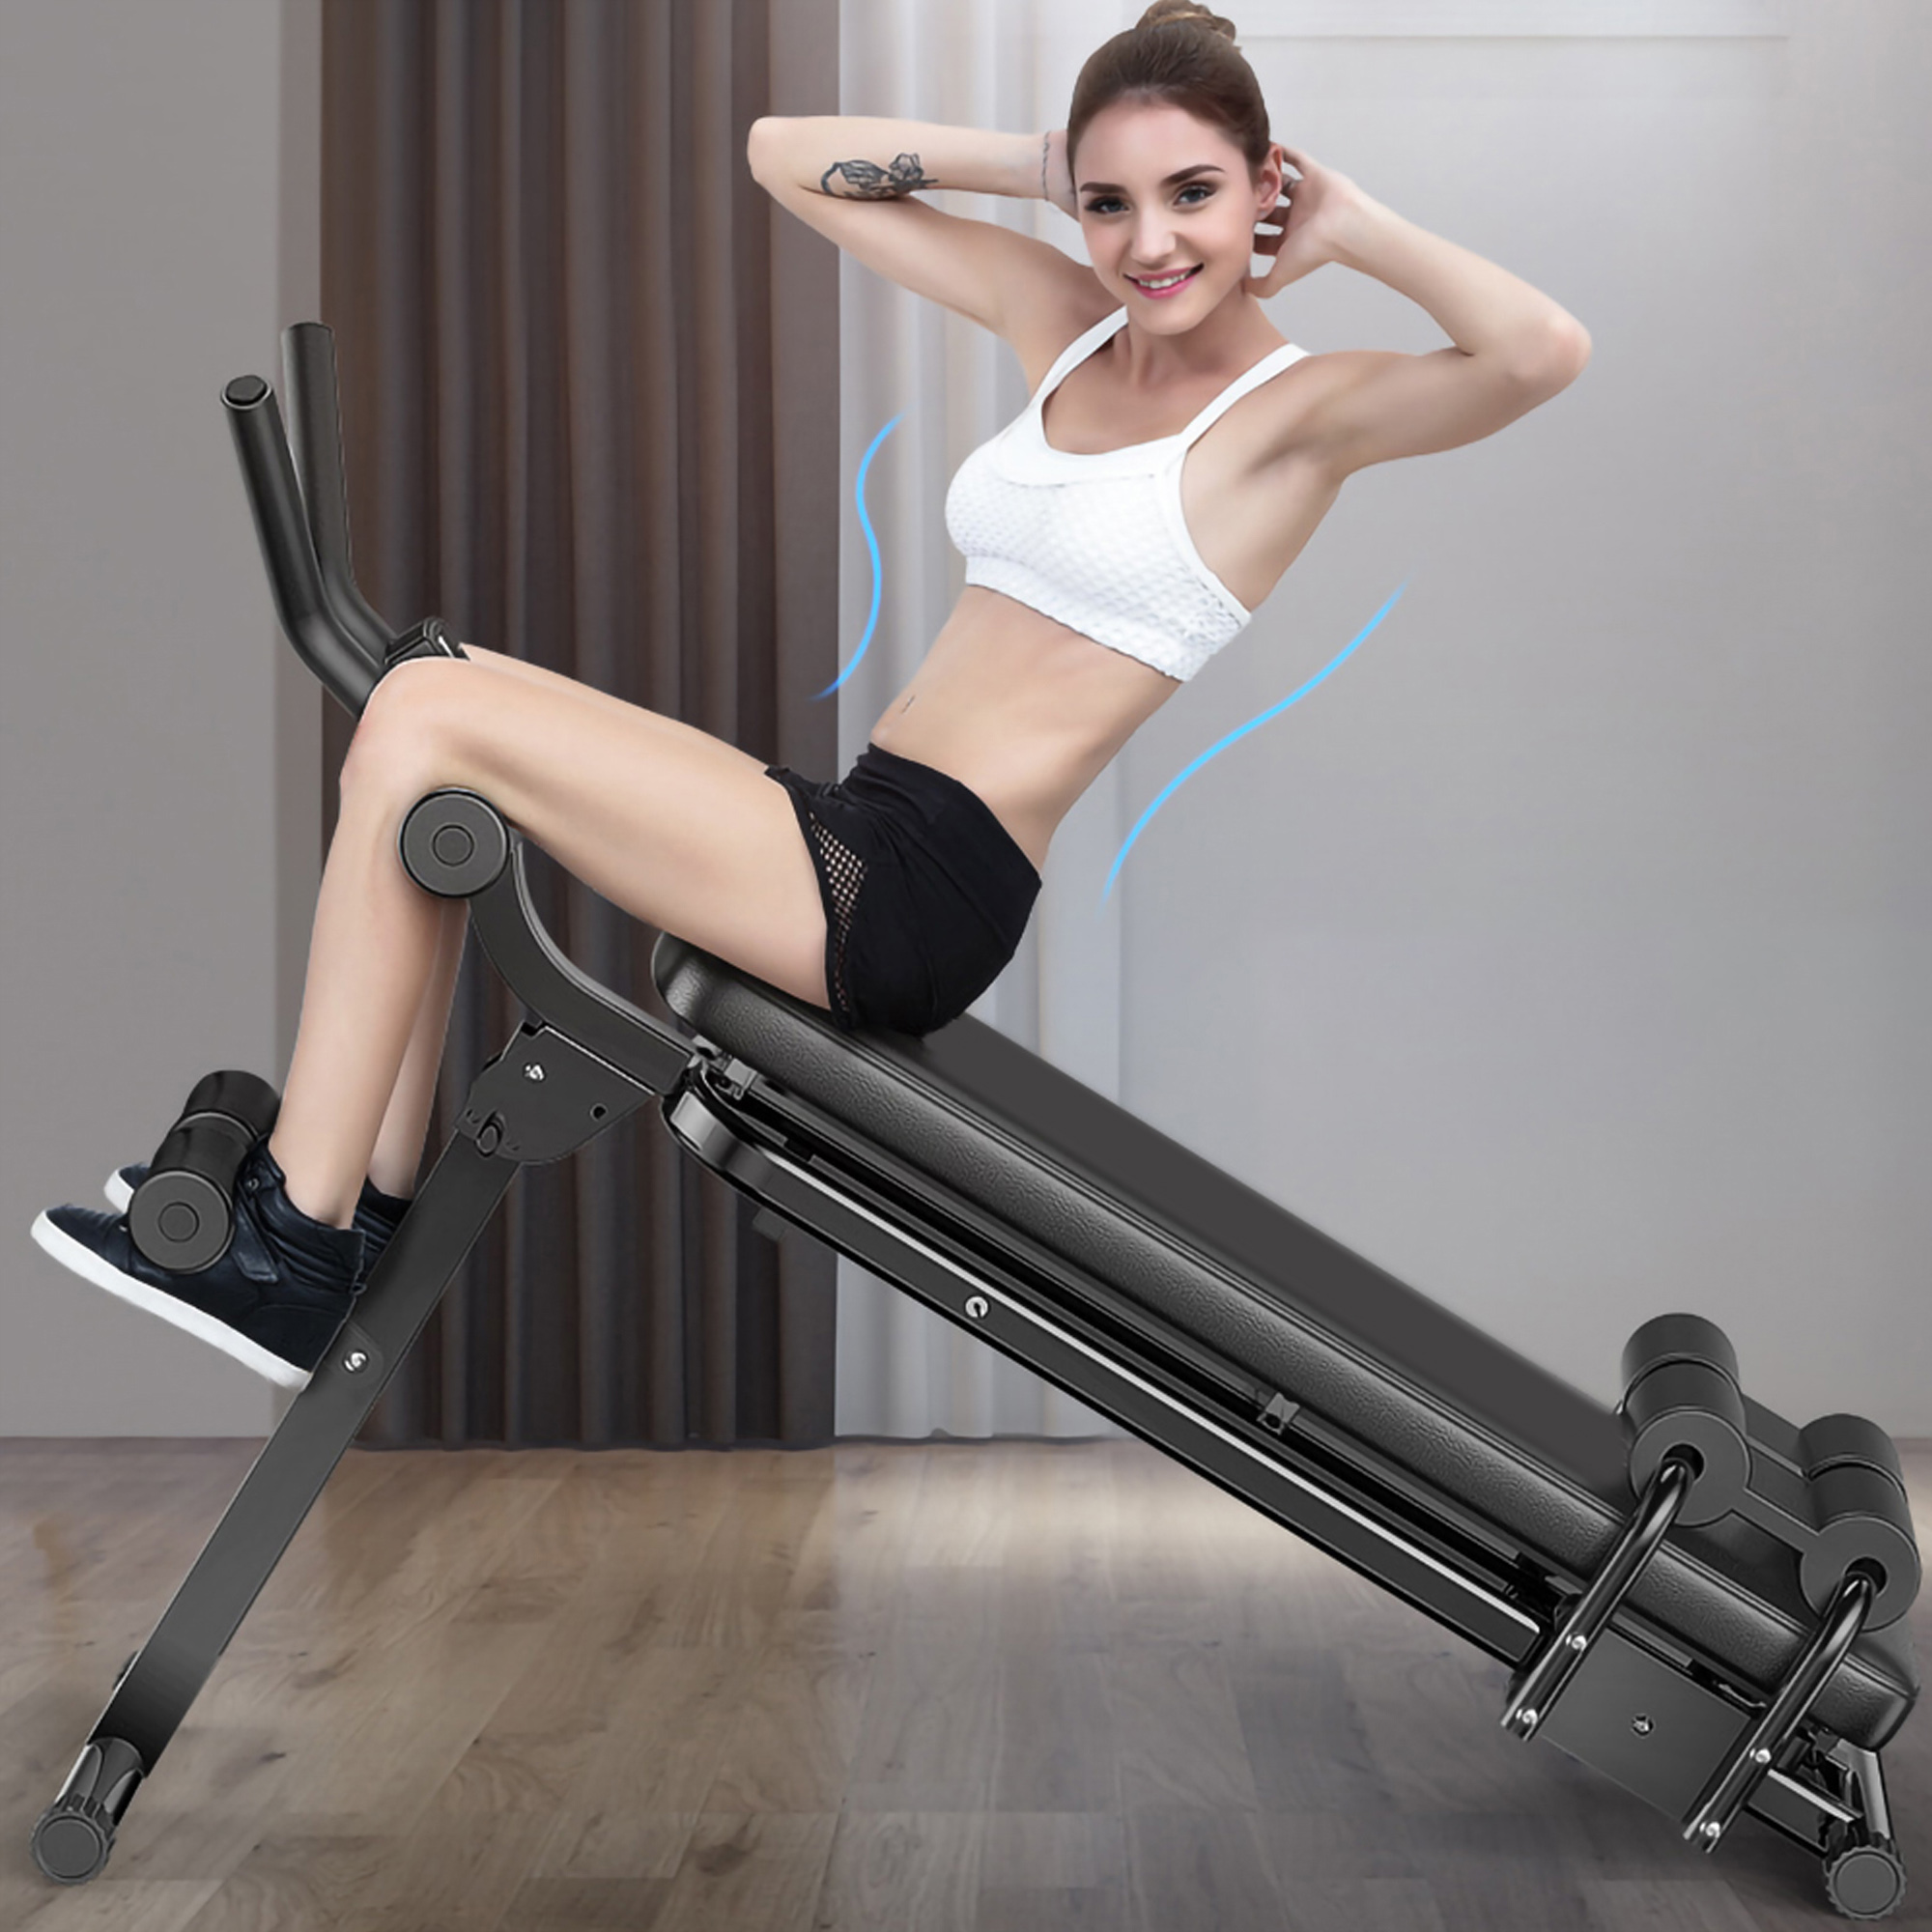 SAYFUT Roller Coaster Abdominal Machine Waist Fitness Equipment Abdomen Exercise Machine with LCD Display, for Home Gym Muscle Build Fitness Workout - image 2 of 7